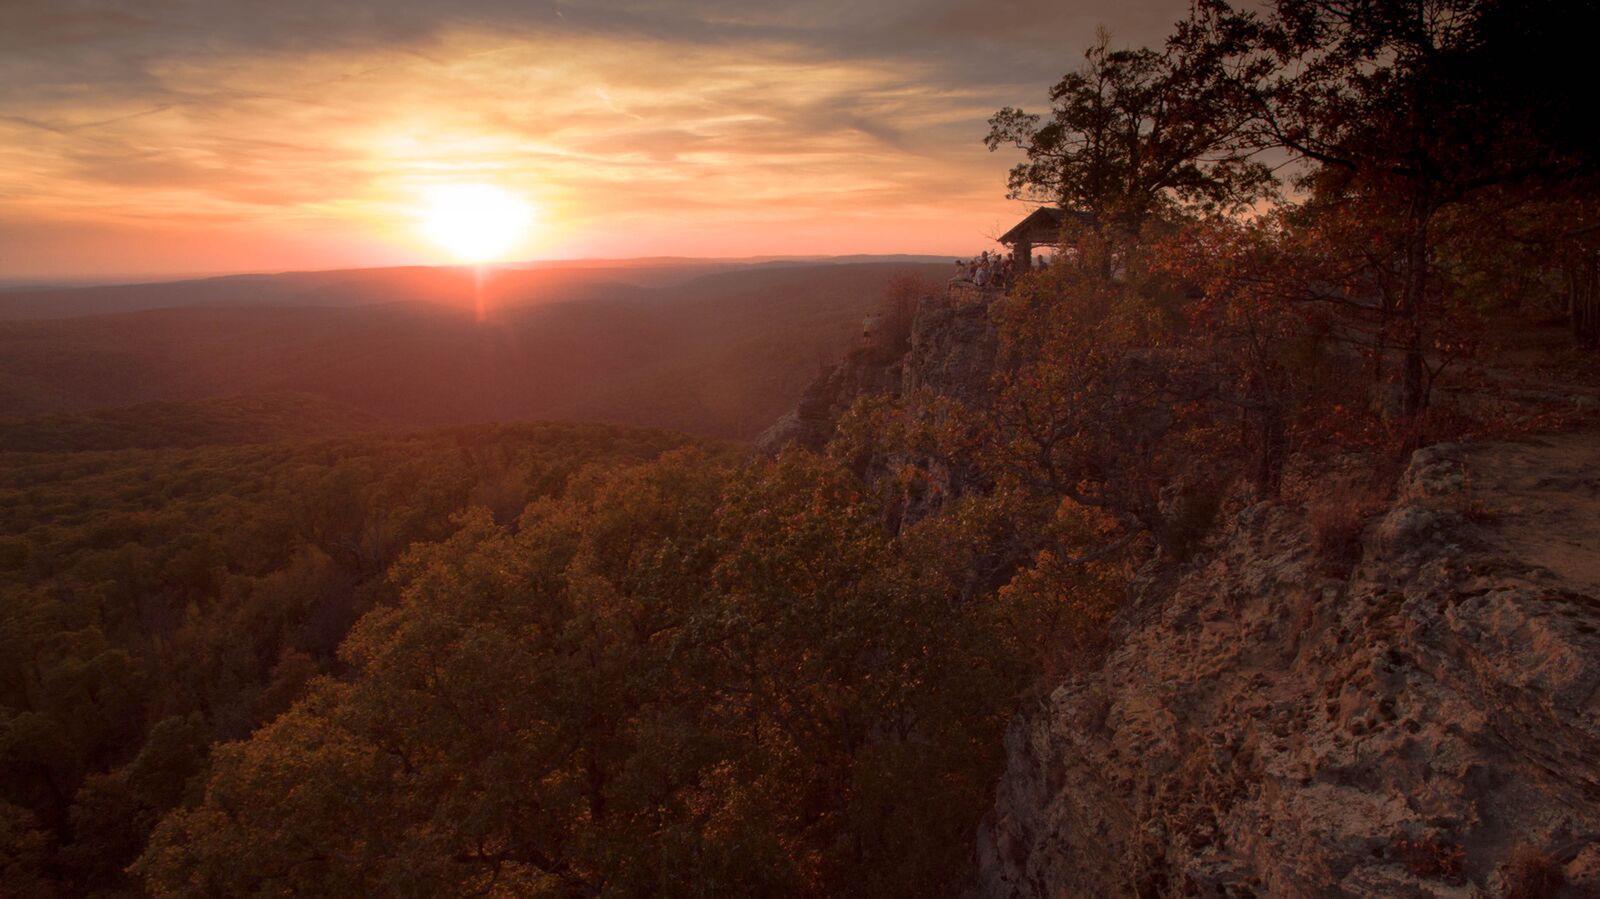 WHITE ROCK MOUNTAIN RECREATION AREAIncredible views offering unspoiled vistas and stunning sunsets.